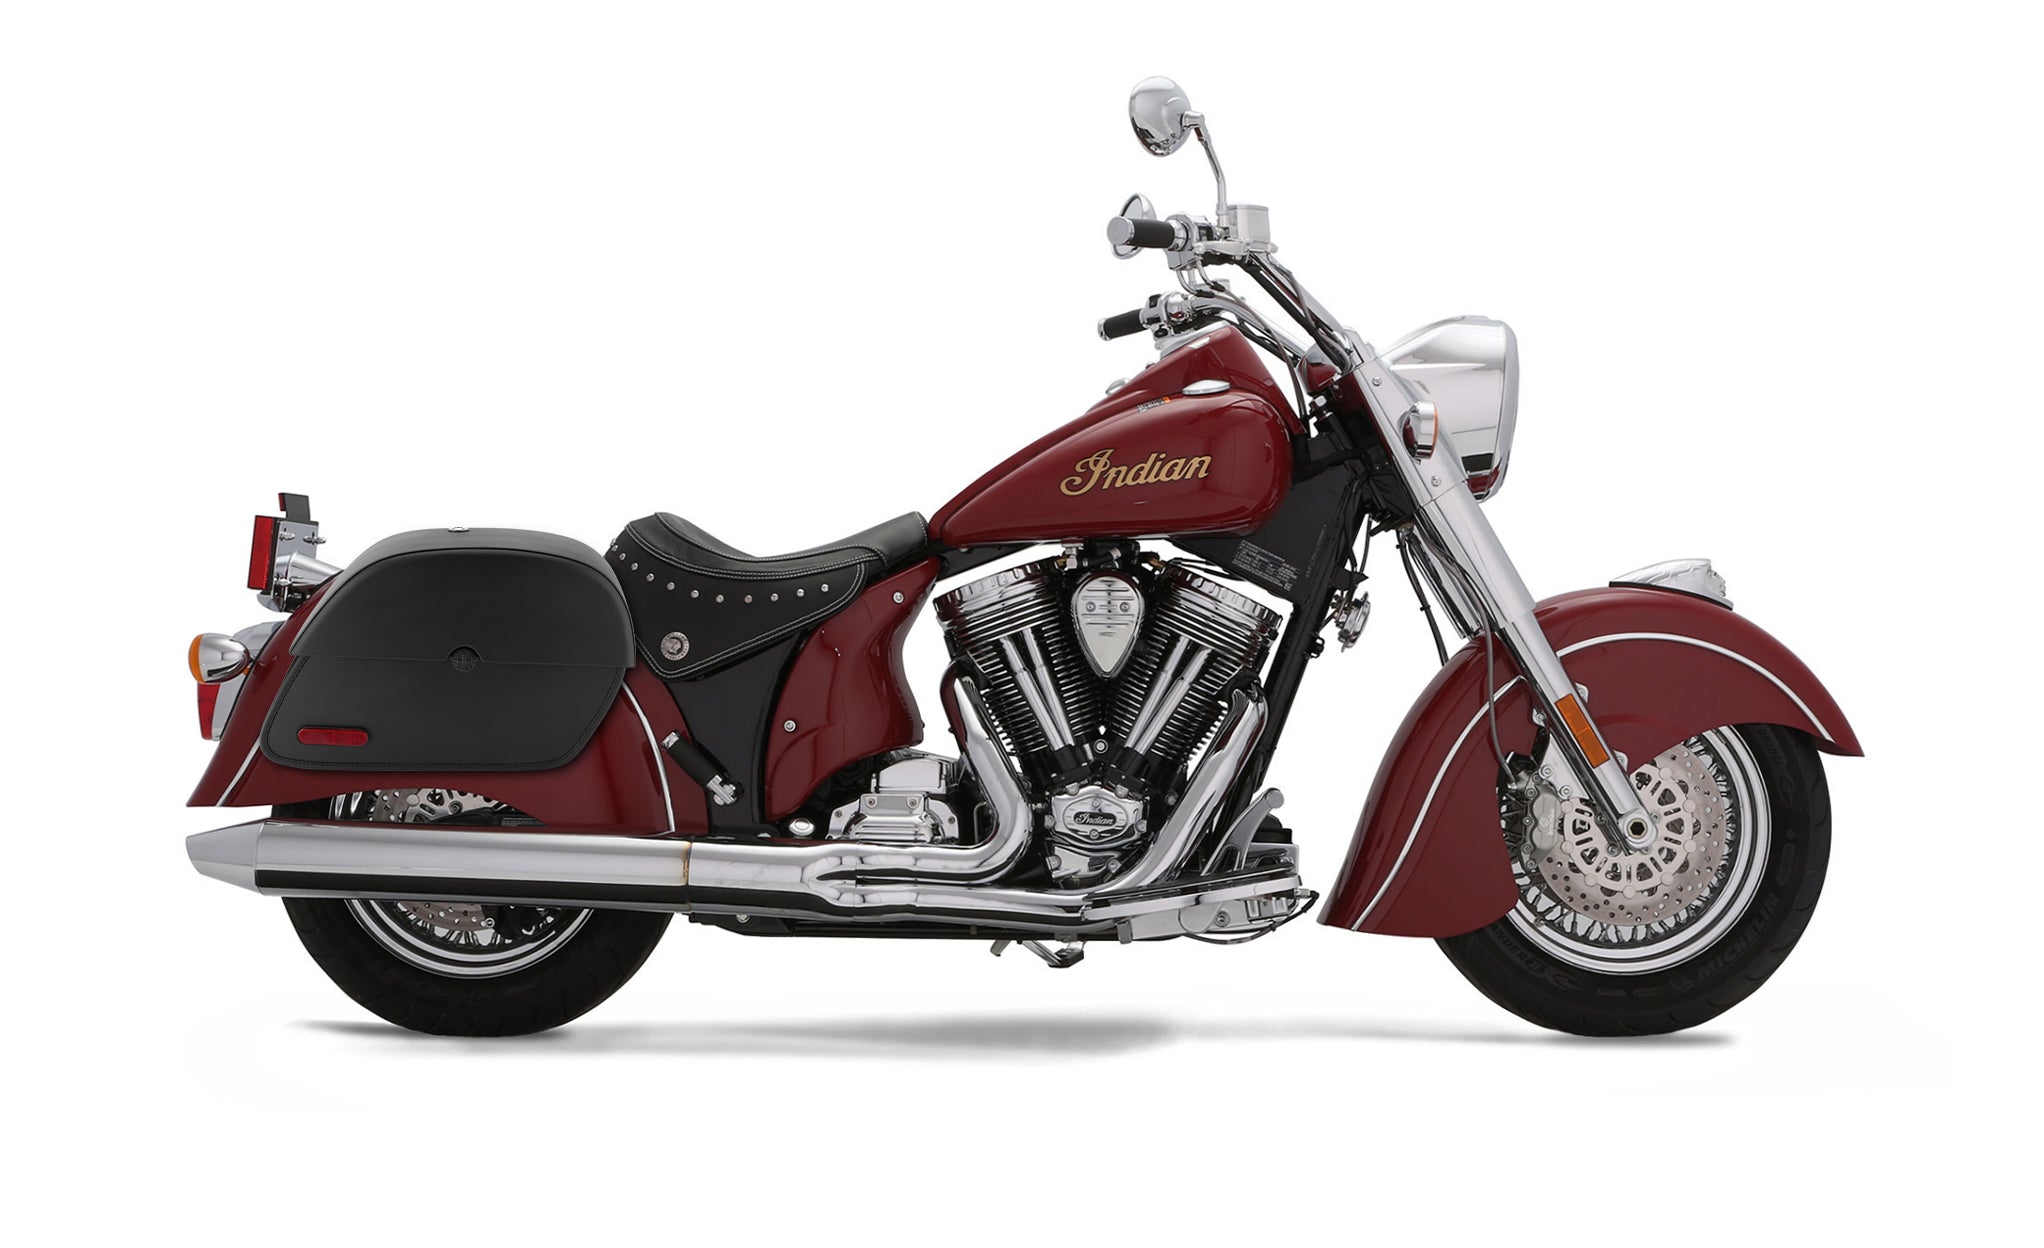 Viking Panzer Medium Indian Chief Deluxe Leather Motorcycle Saddlebags Engineering Excellence with Bag on Bike @expand